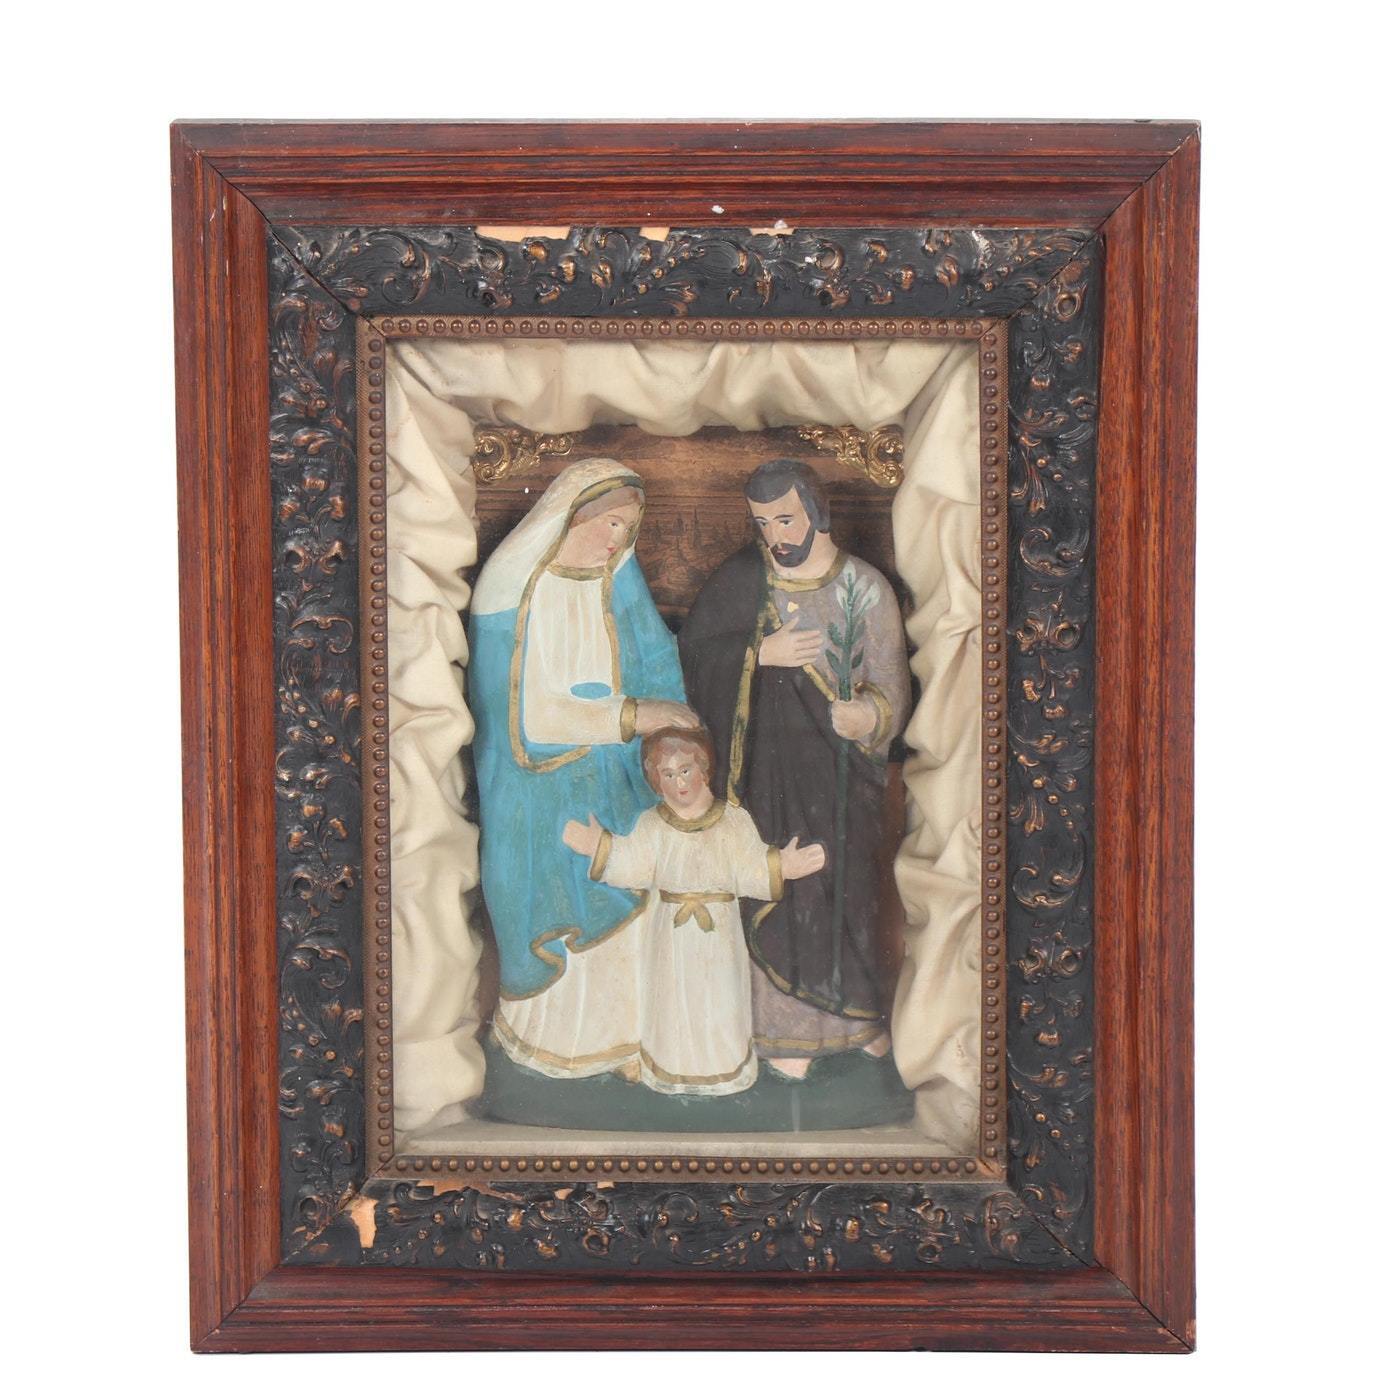 Wonderful Antique Hand-Painted Folk Art Retablo Wood Carving of The Holy Family